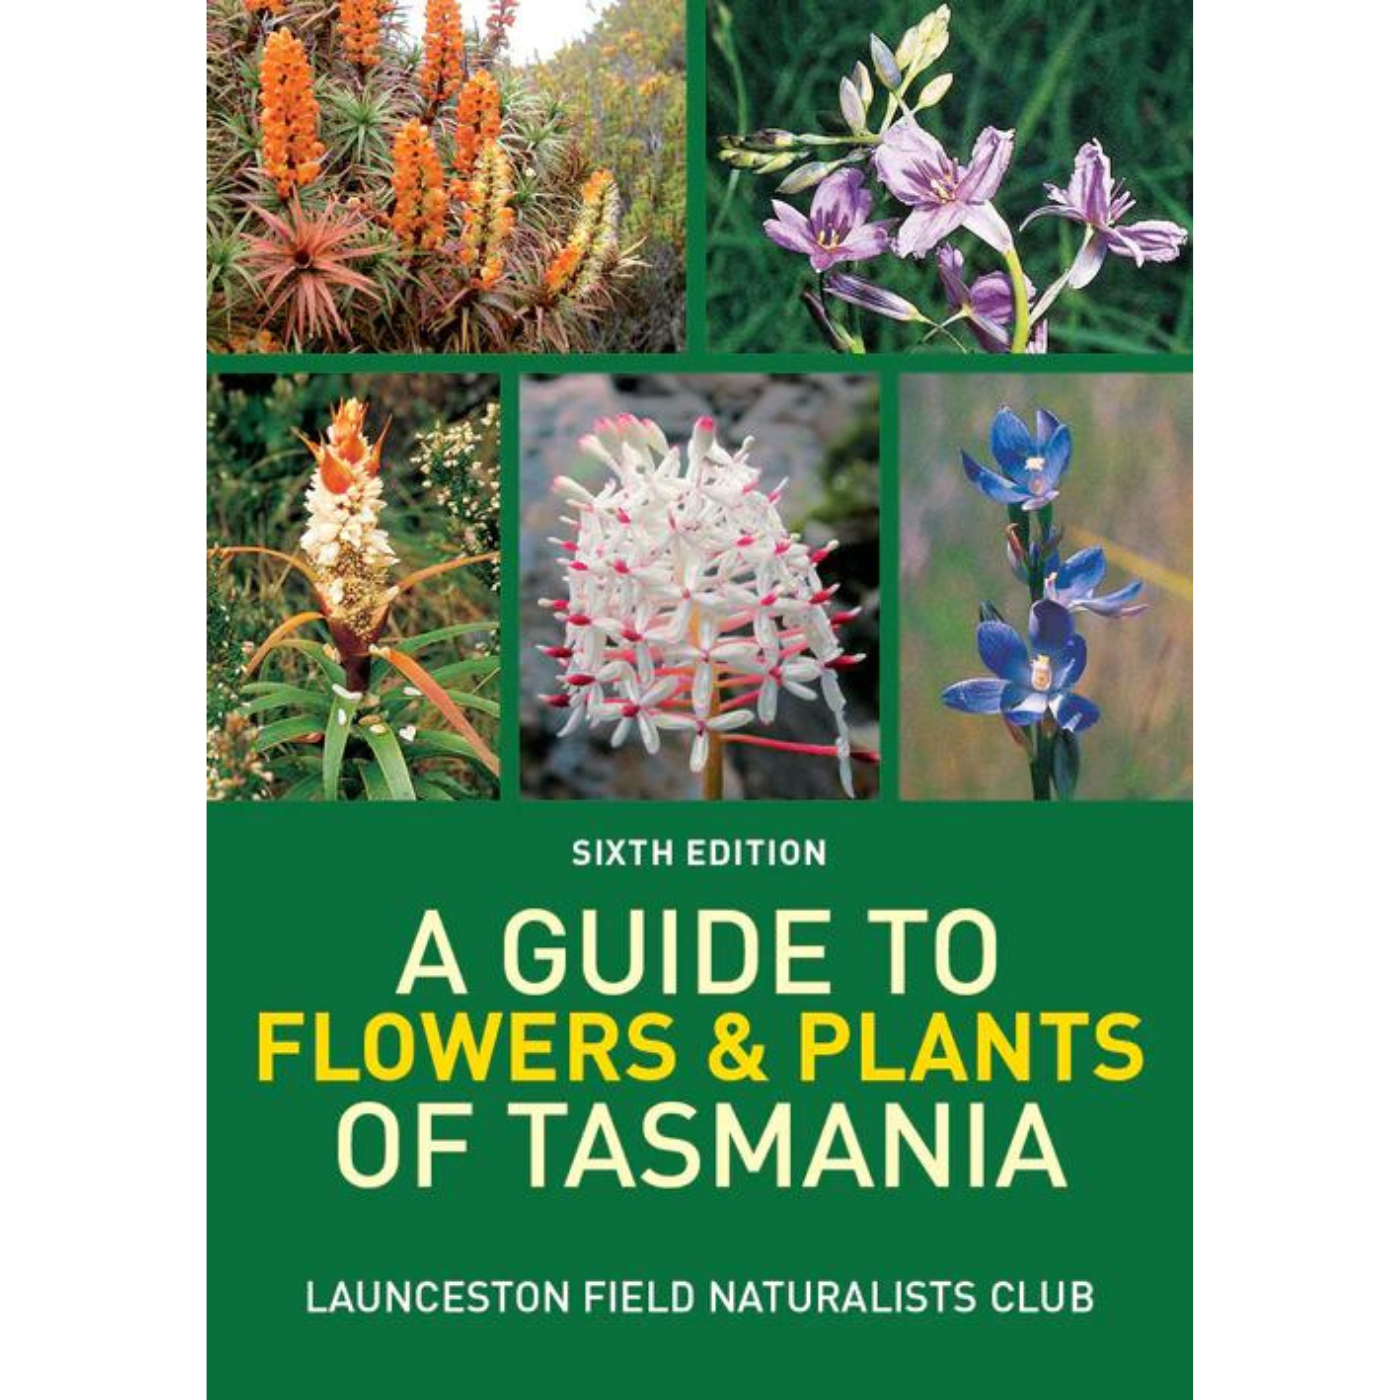 A Guide to Flowers and Plants of Tasmania - Sixth Edition